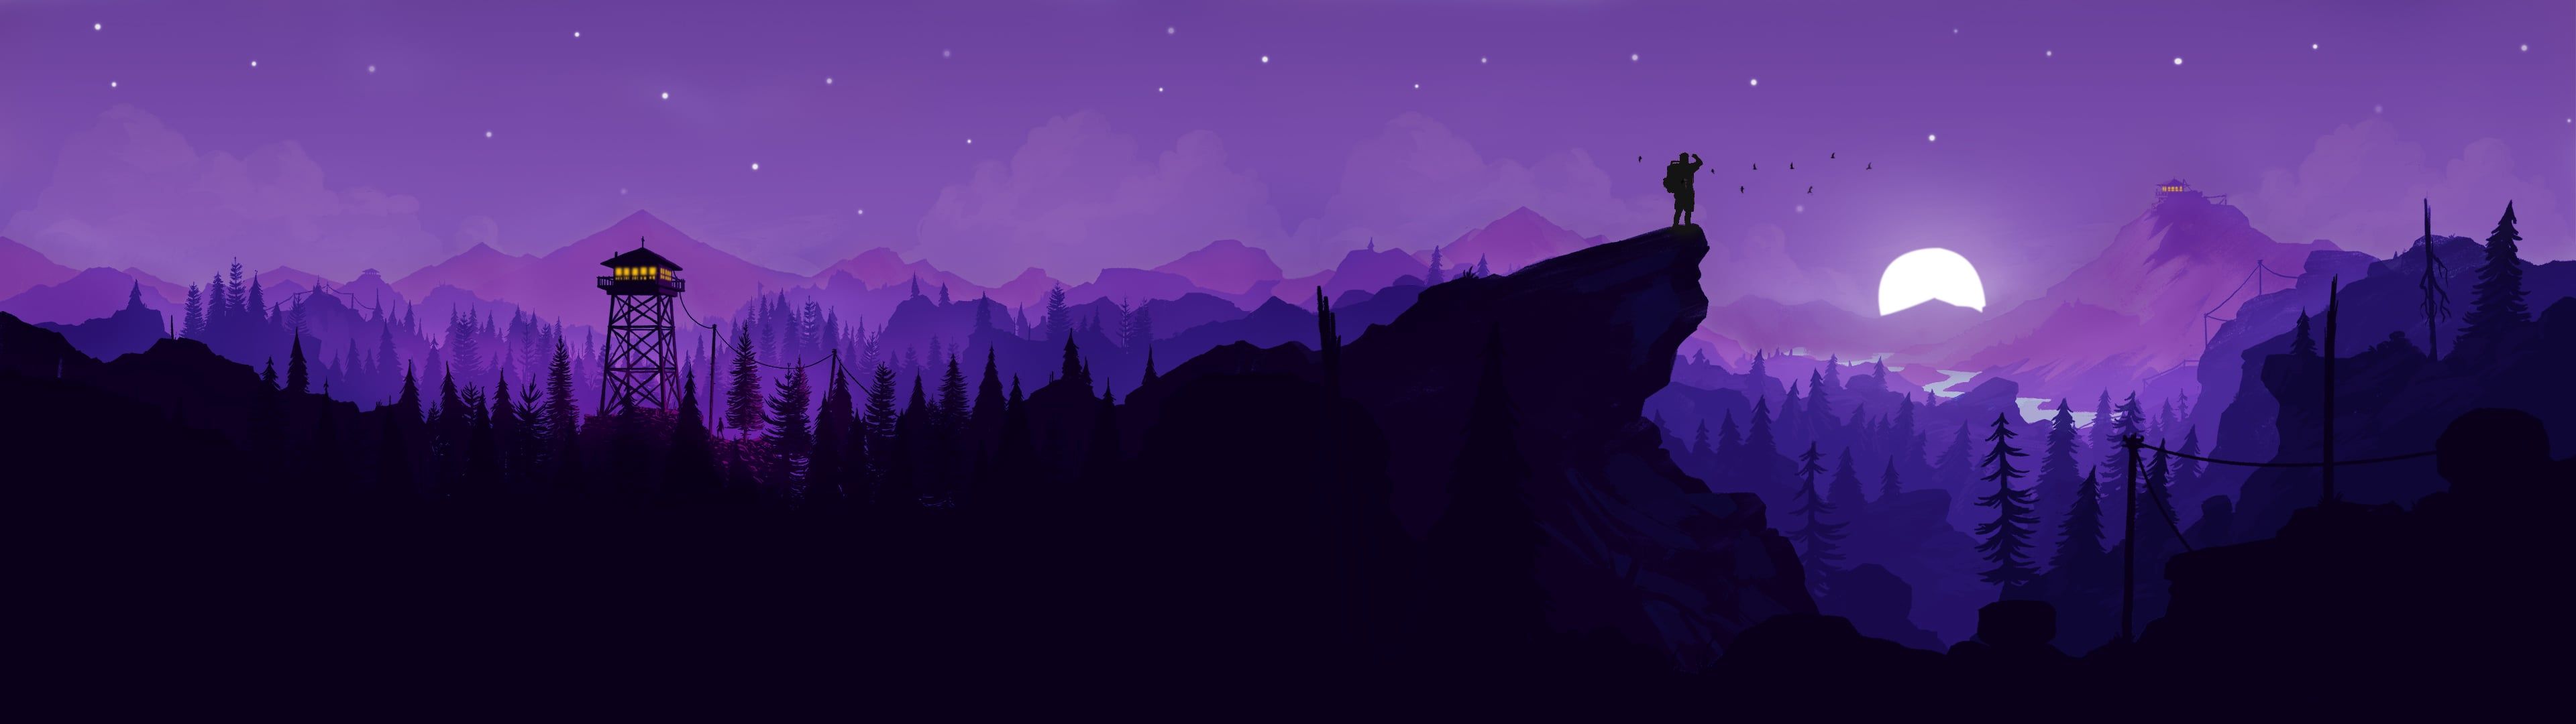  3840x1080 Hintergrundbild 3840x1080. Played Around With The Firewatch Art And Made This Pretty Cool Dual Monitor Wallpaper [3840x1080]